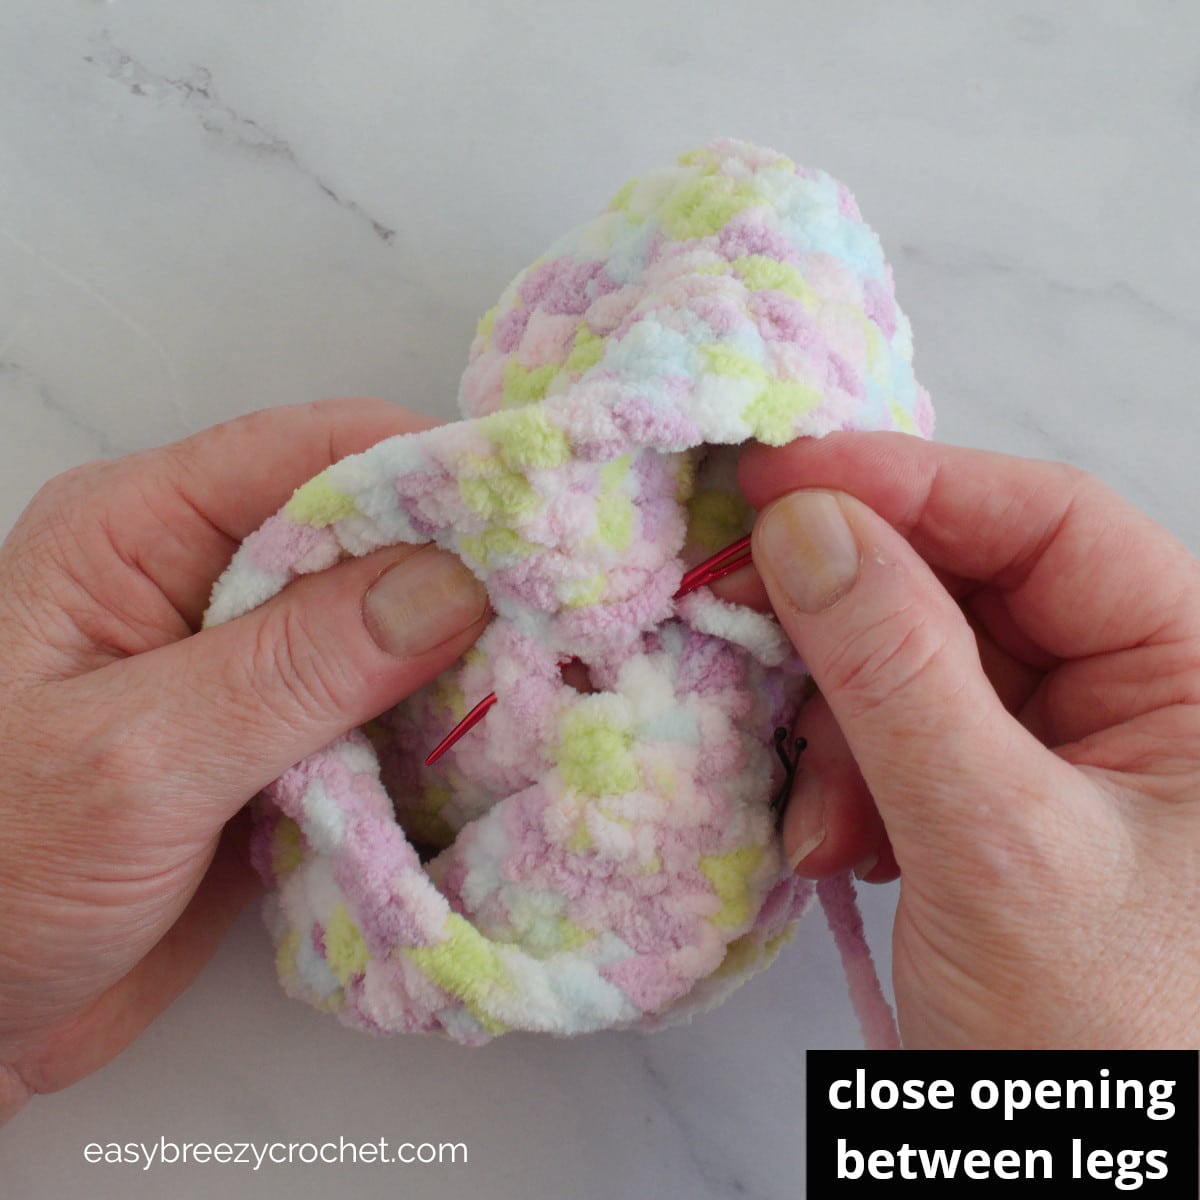 Sewing closed and opening in a crochet piece.